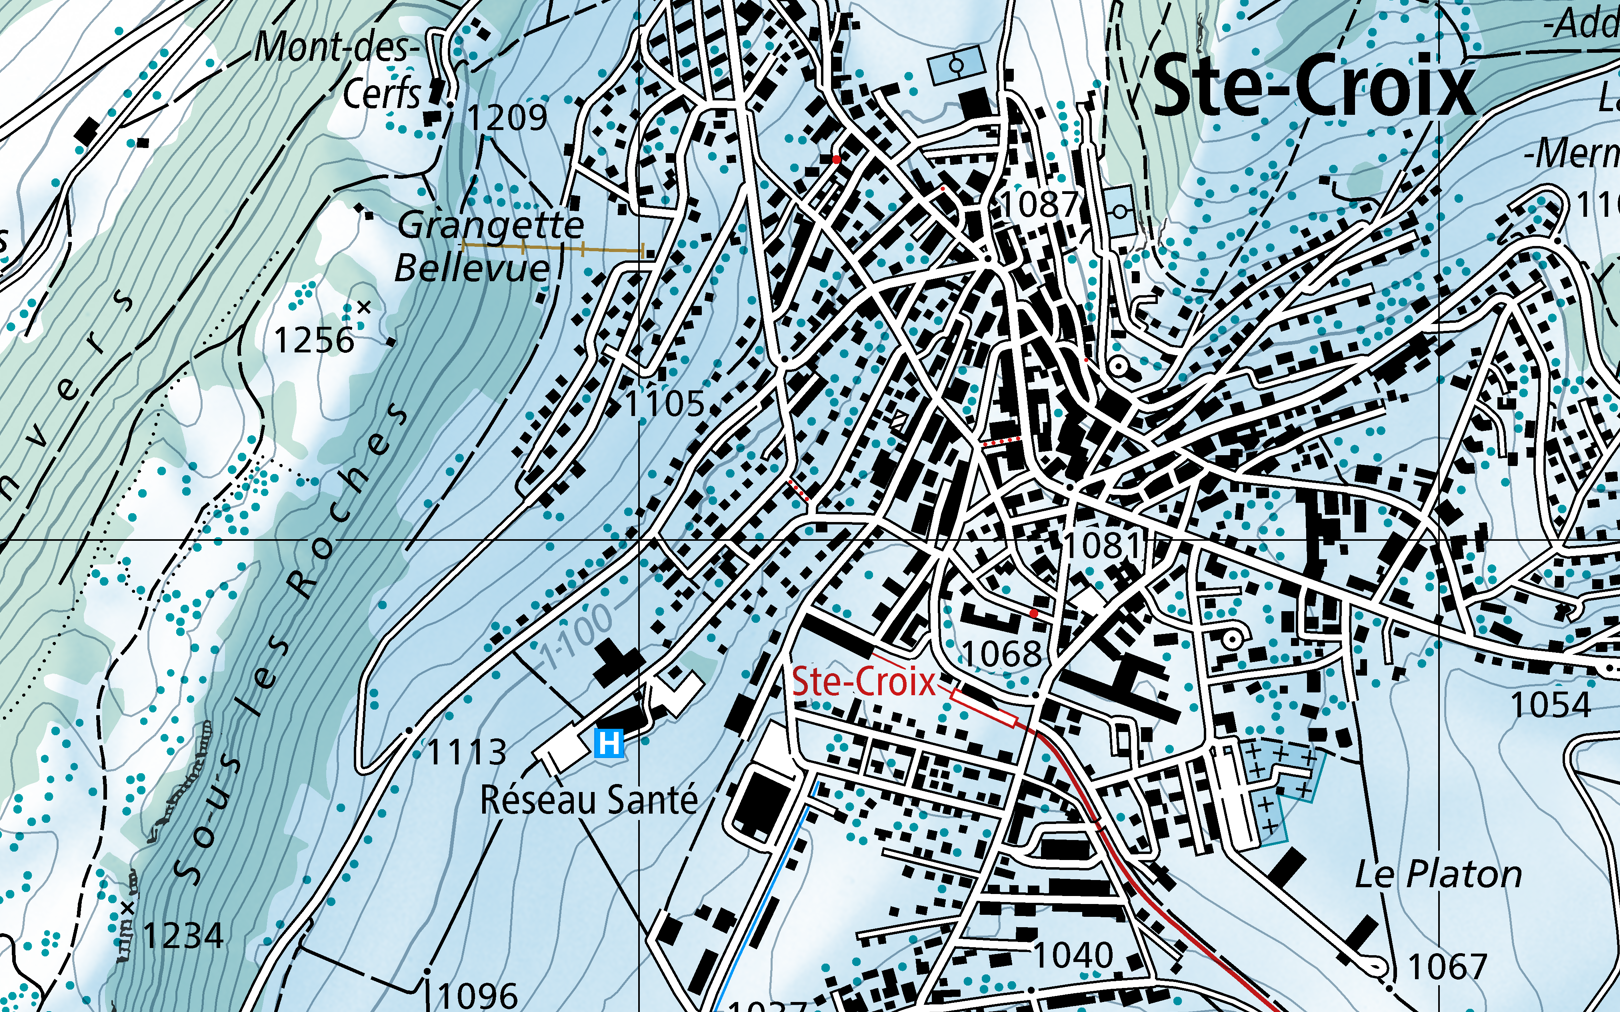 The picture shows a section of a map of Ste-Croix in winter colours.